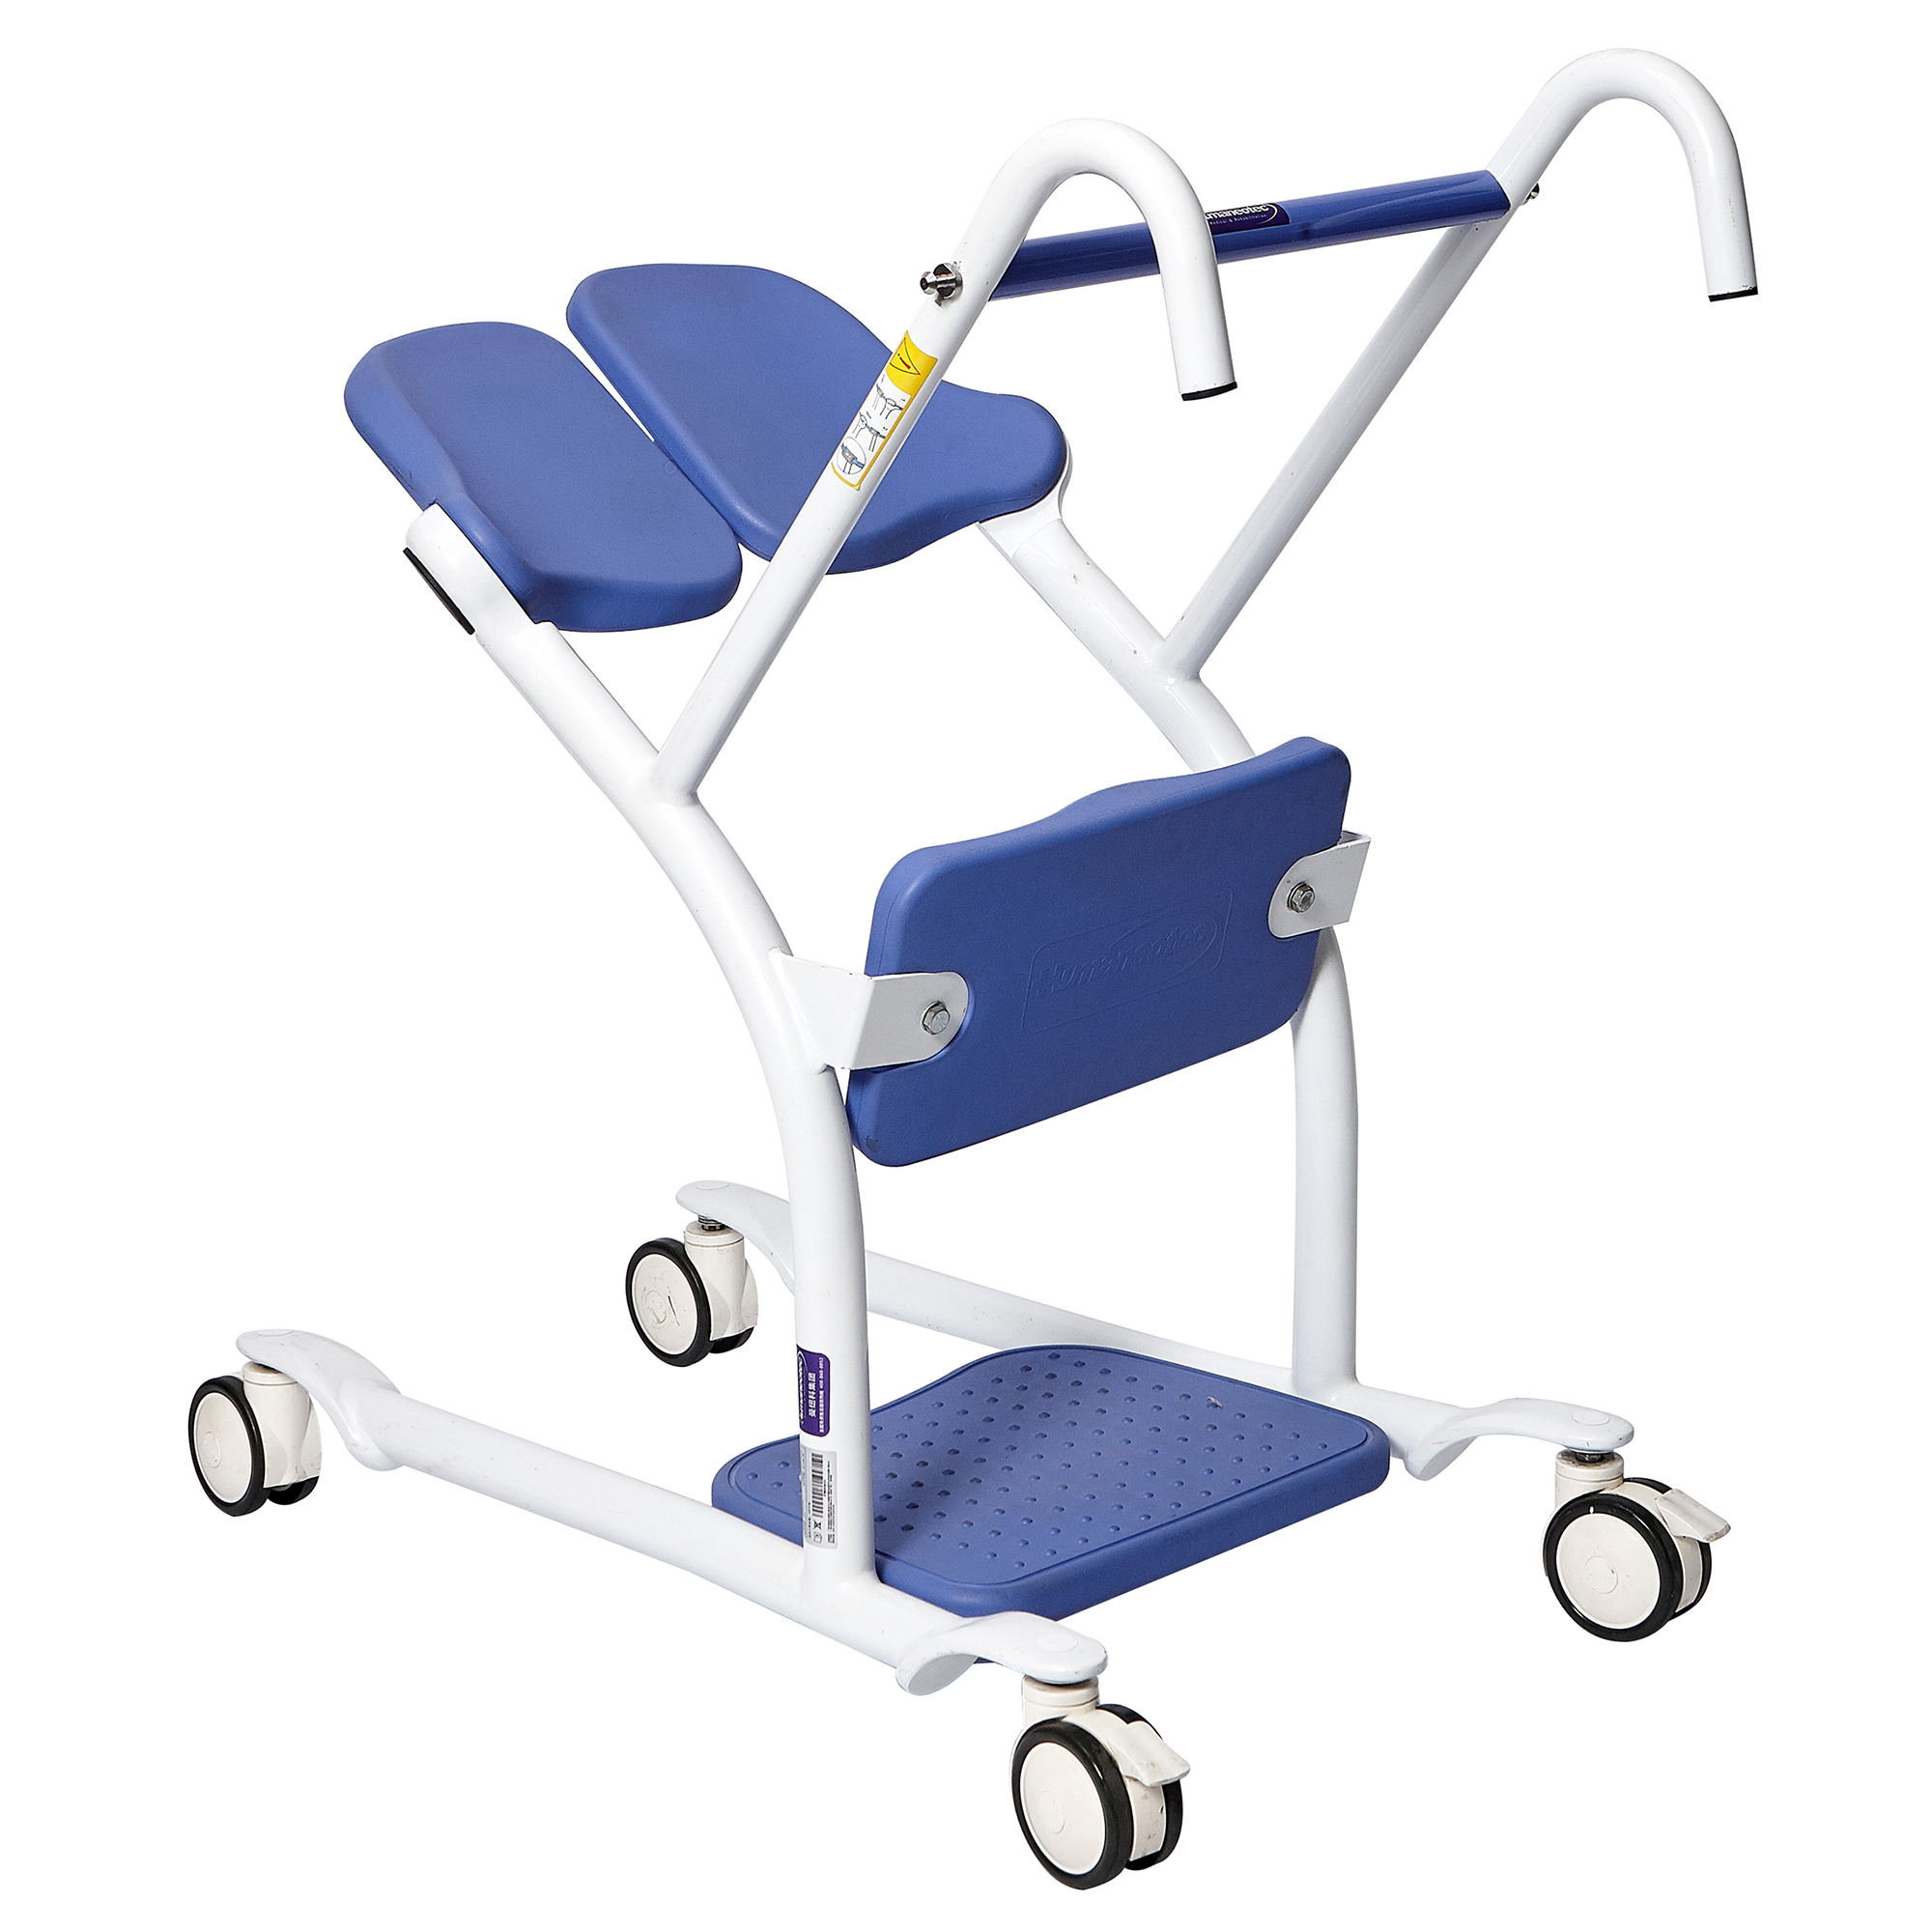 Portable Chair Assist Riser Help Rise from Seated Position Mobility Standing Aid Health Personal Care